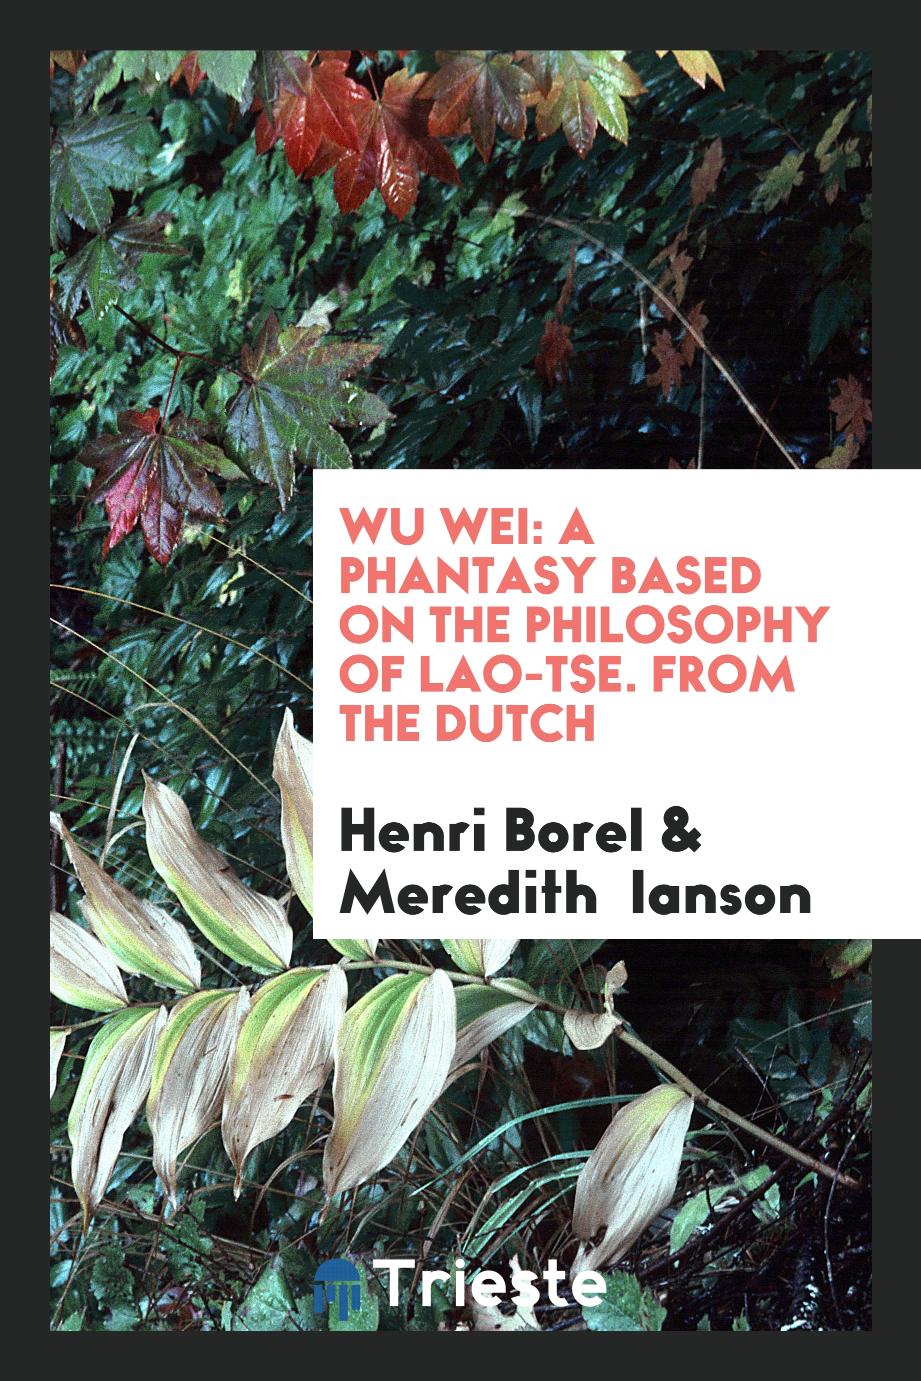 Wu Wei: A Phantasy Based on the Philosophy of Lao-Tse. From the Dutch